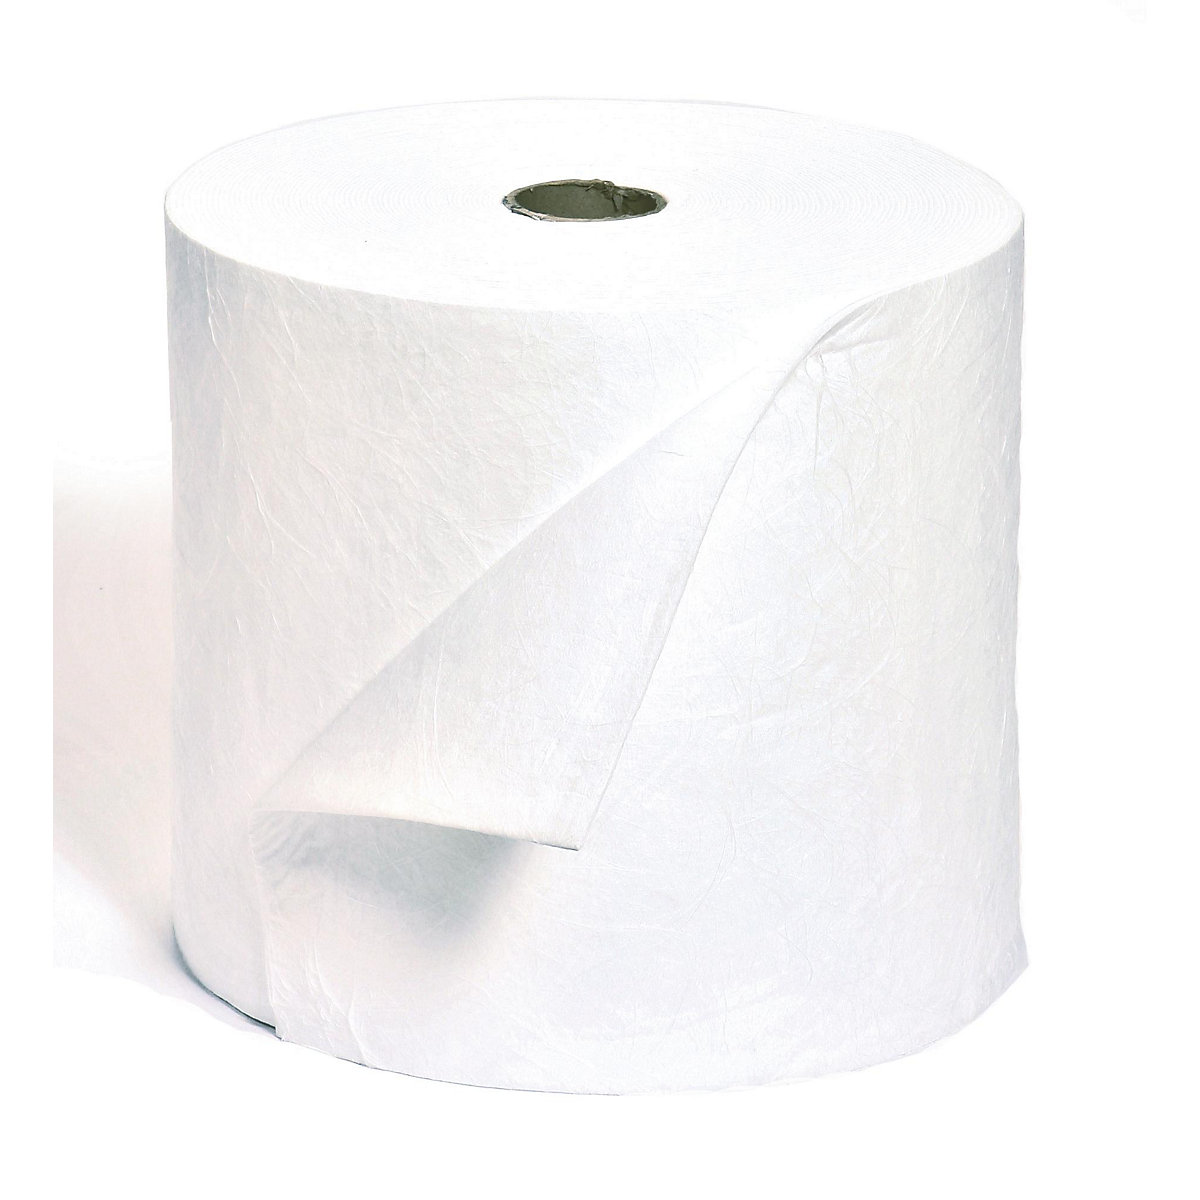 FIRST absorbent sheeting, roll of sheeting, heavy version, for oil, 400 mm x 40 m, white, pack of 2 rolls-11